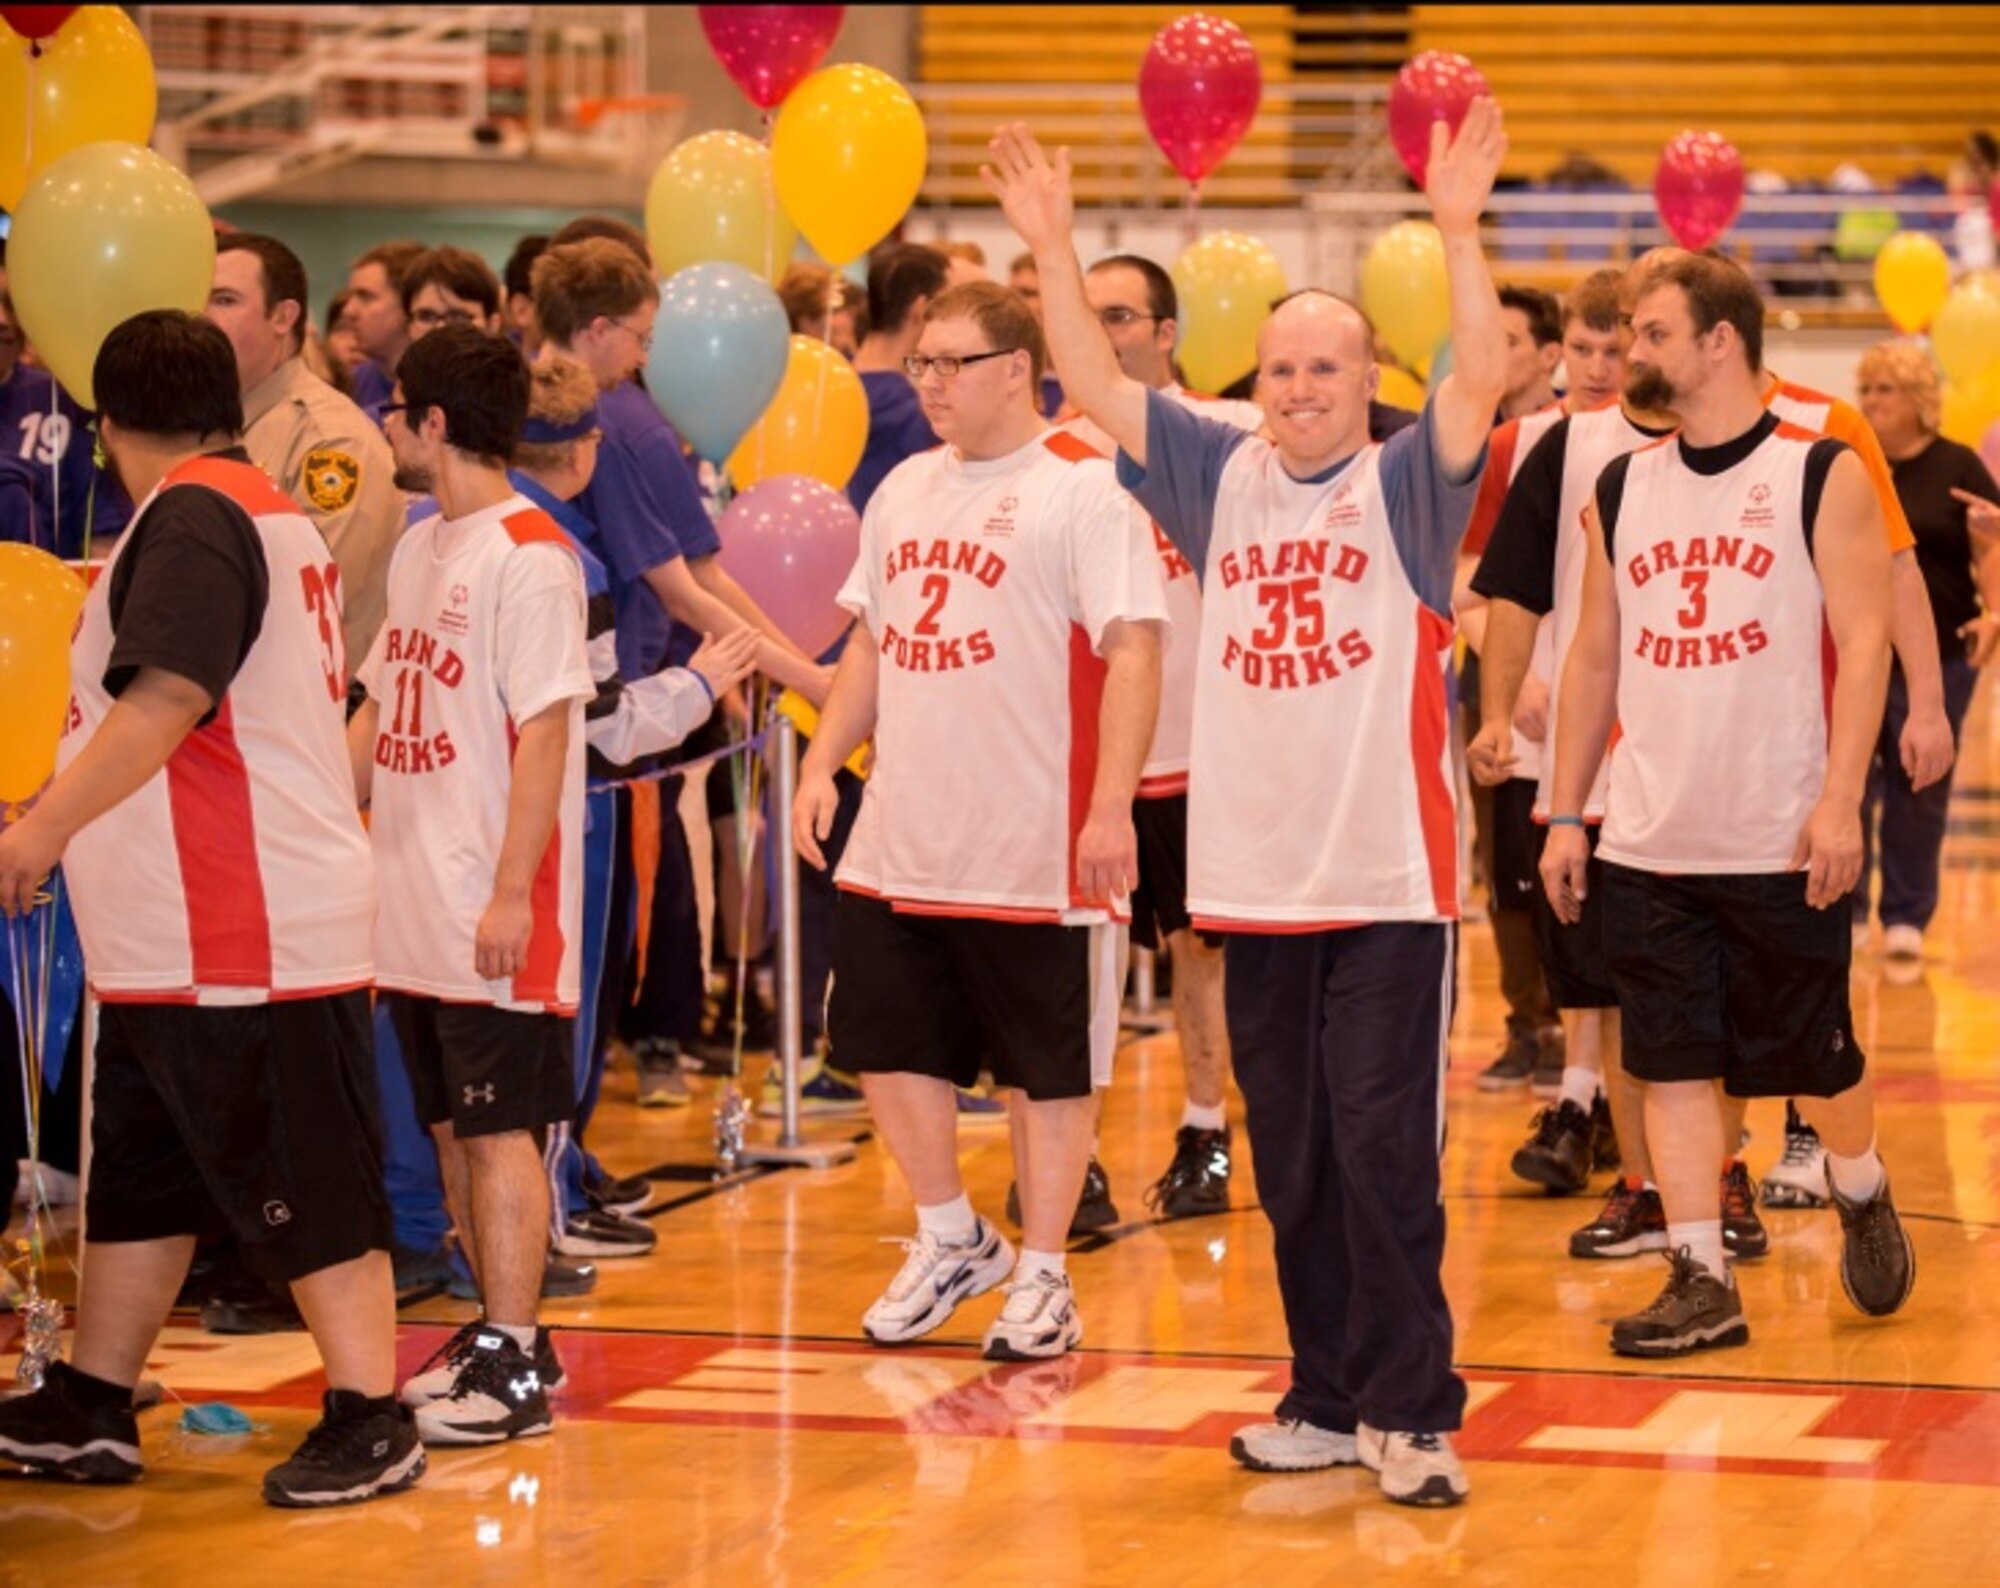 A member of the Grand Forks Special Olympics team waves to the crowd as his team is introduced at the North Dakota Special Olympics in Minot, N.D., March 4, 2016. Minot Air Force Base members volunteered at the event as referees and other volunteer positions. (U.S. Air Force photo/Airman 1st Class Christian Sullivan)